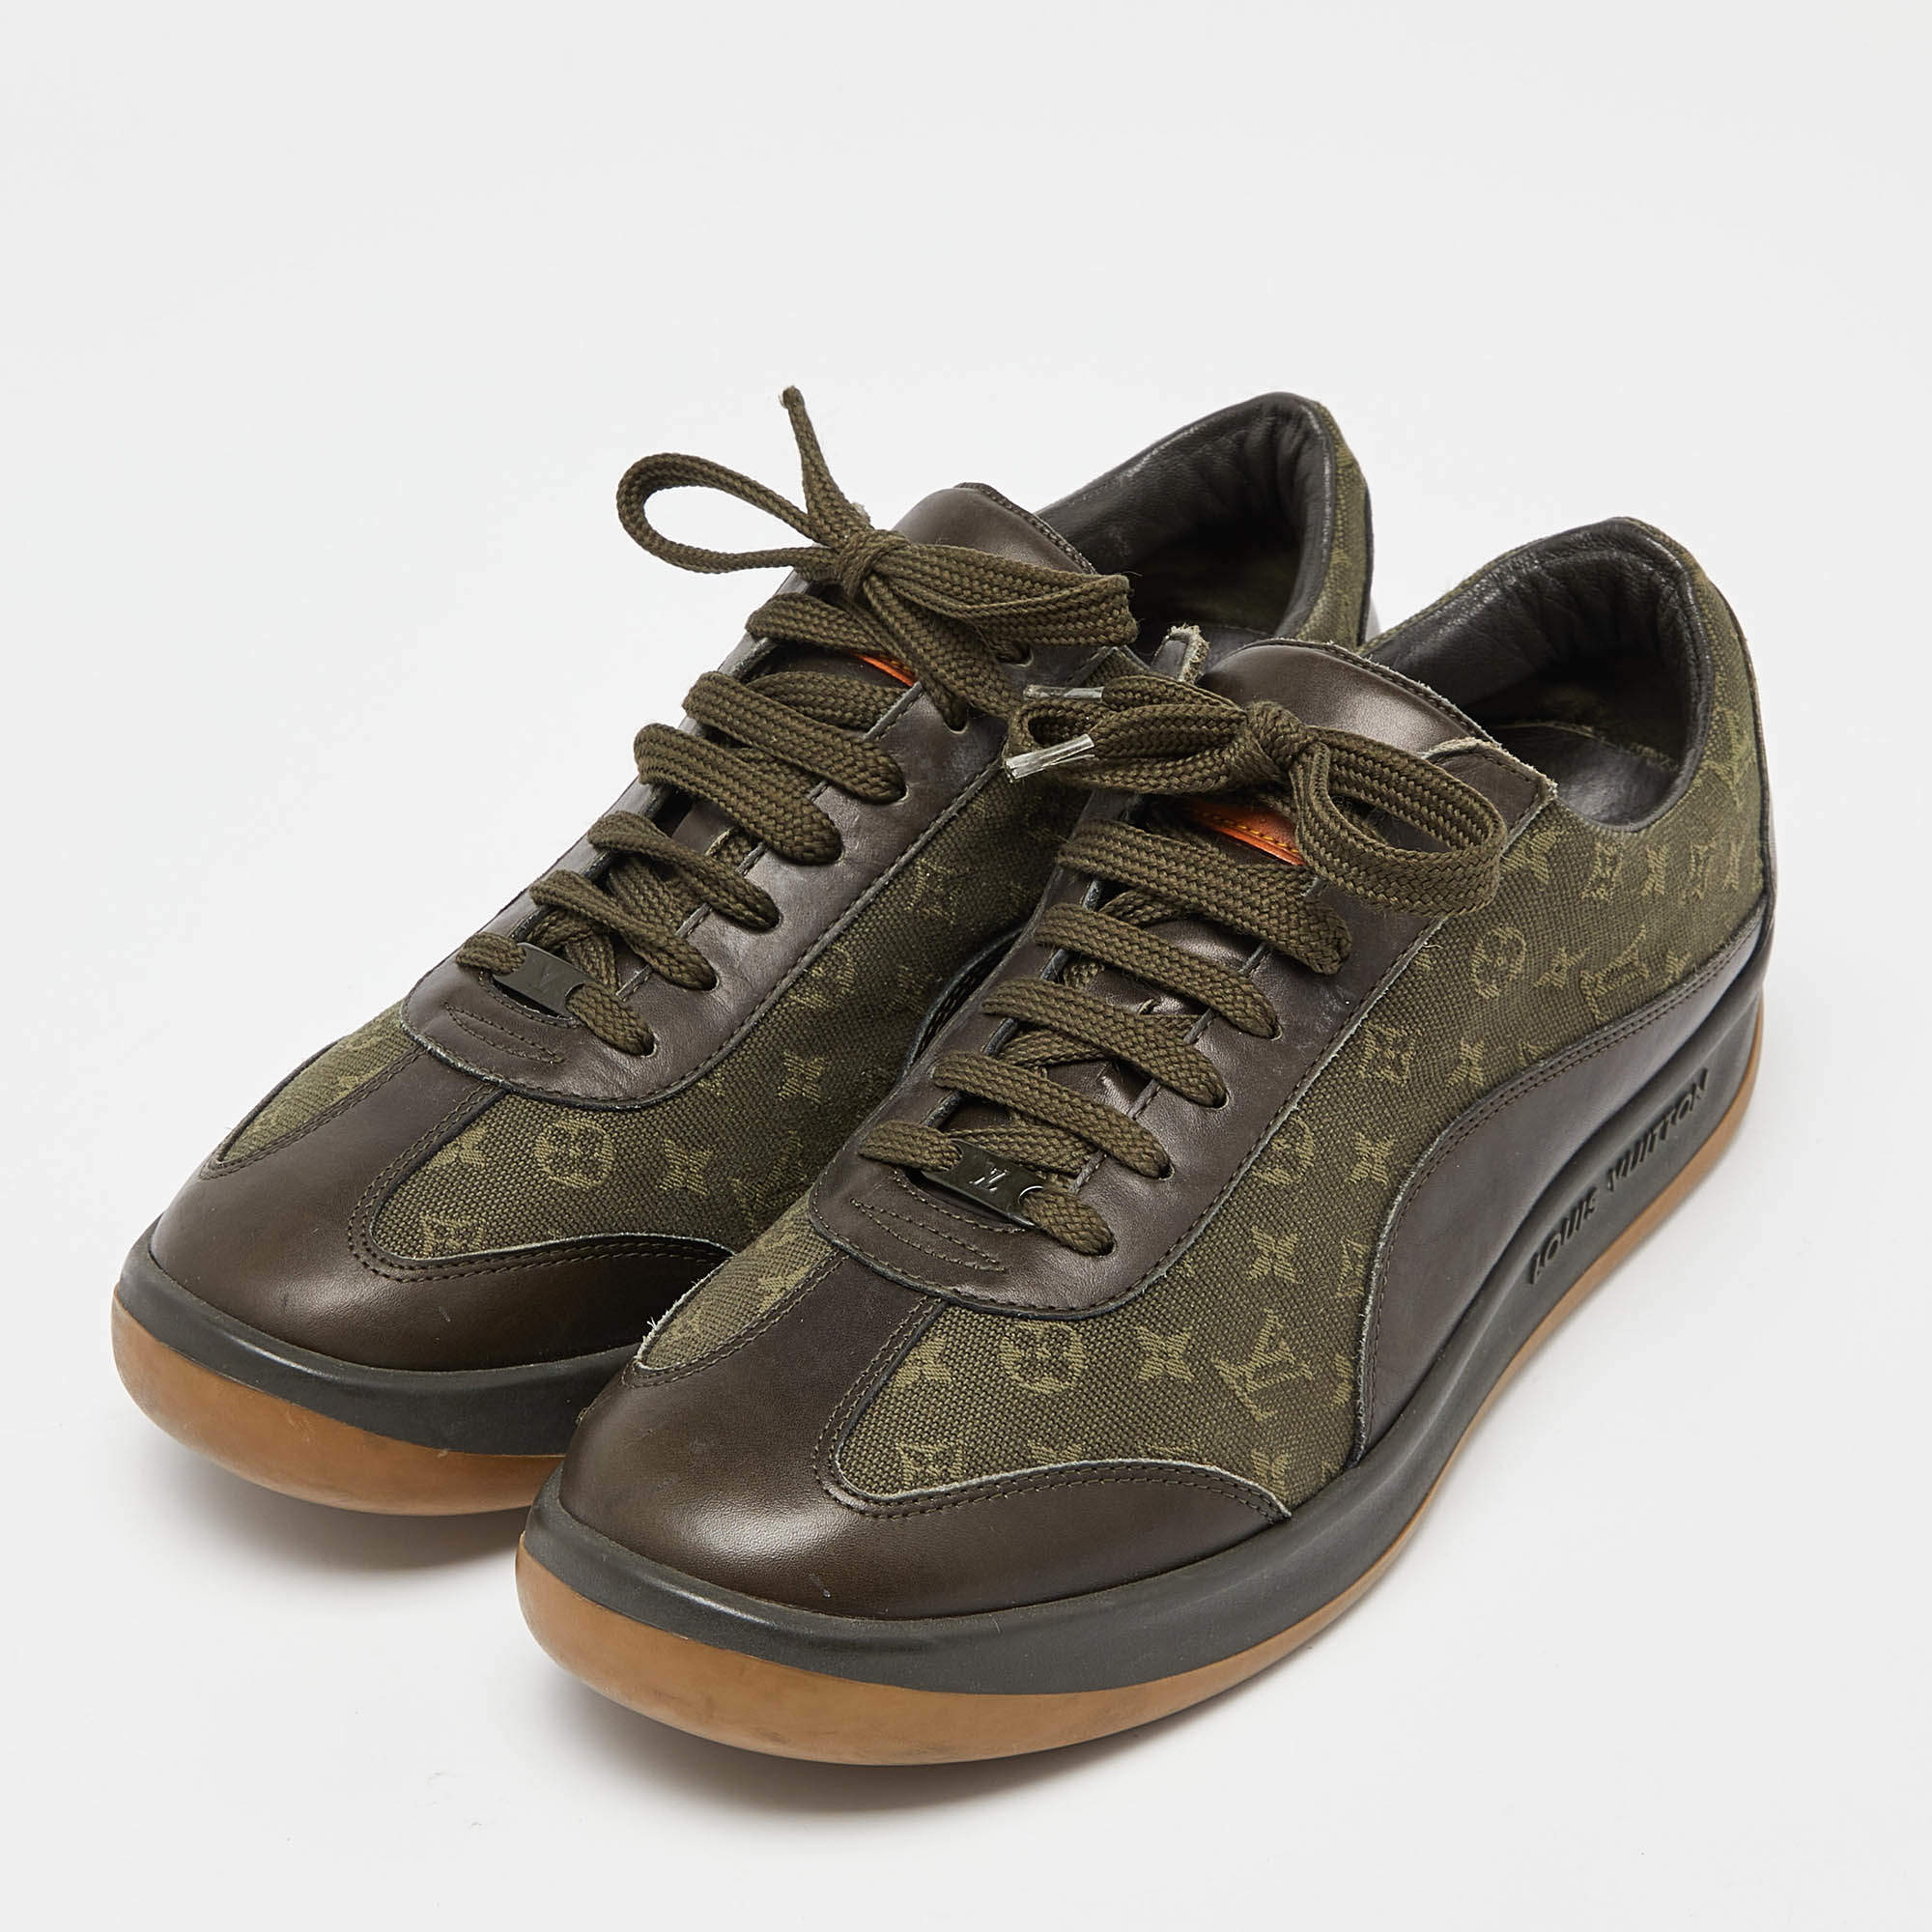 LOUIS VUITTON: Leather/Canvas & Olive Green LV Logo, Sneakers size 37